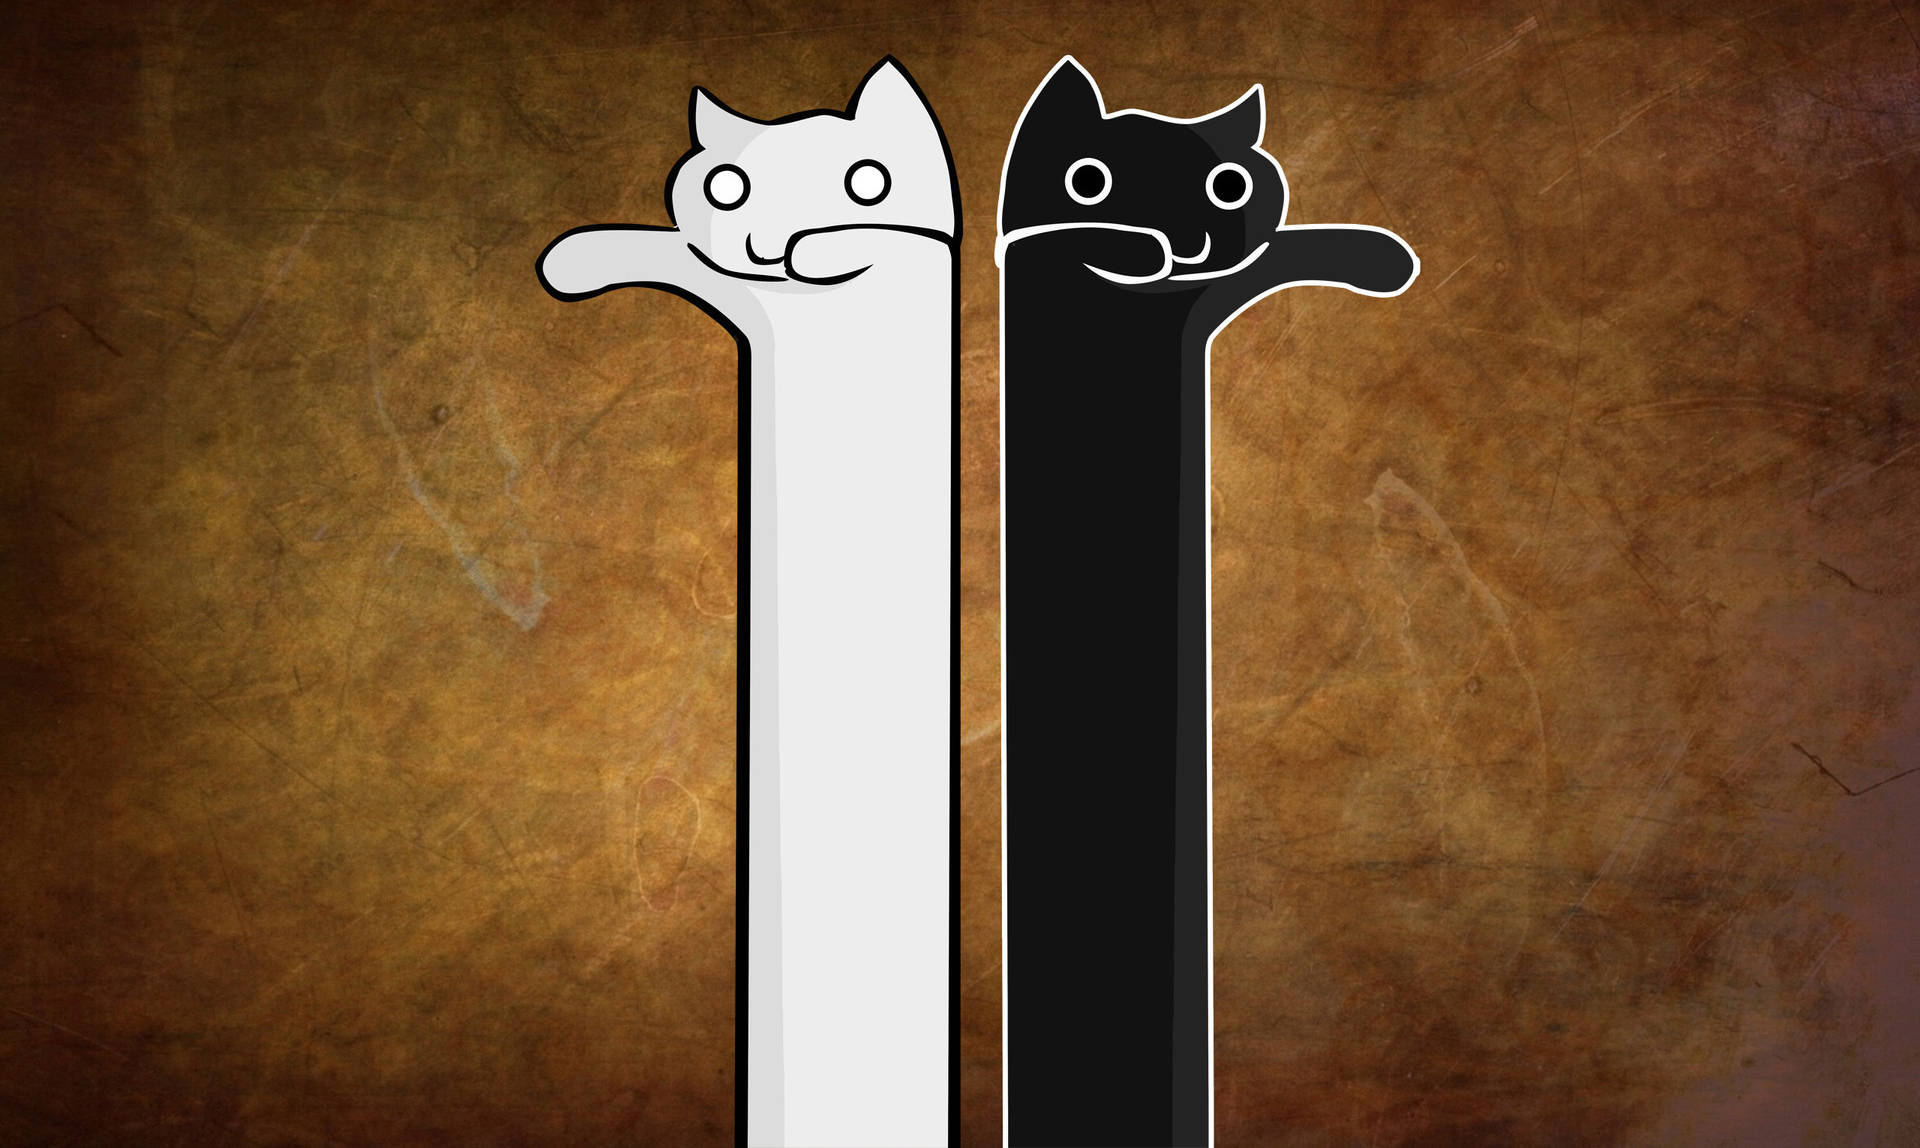 Long cat Meme with long stretchable body scaring something wallpaper.